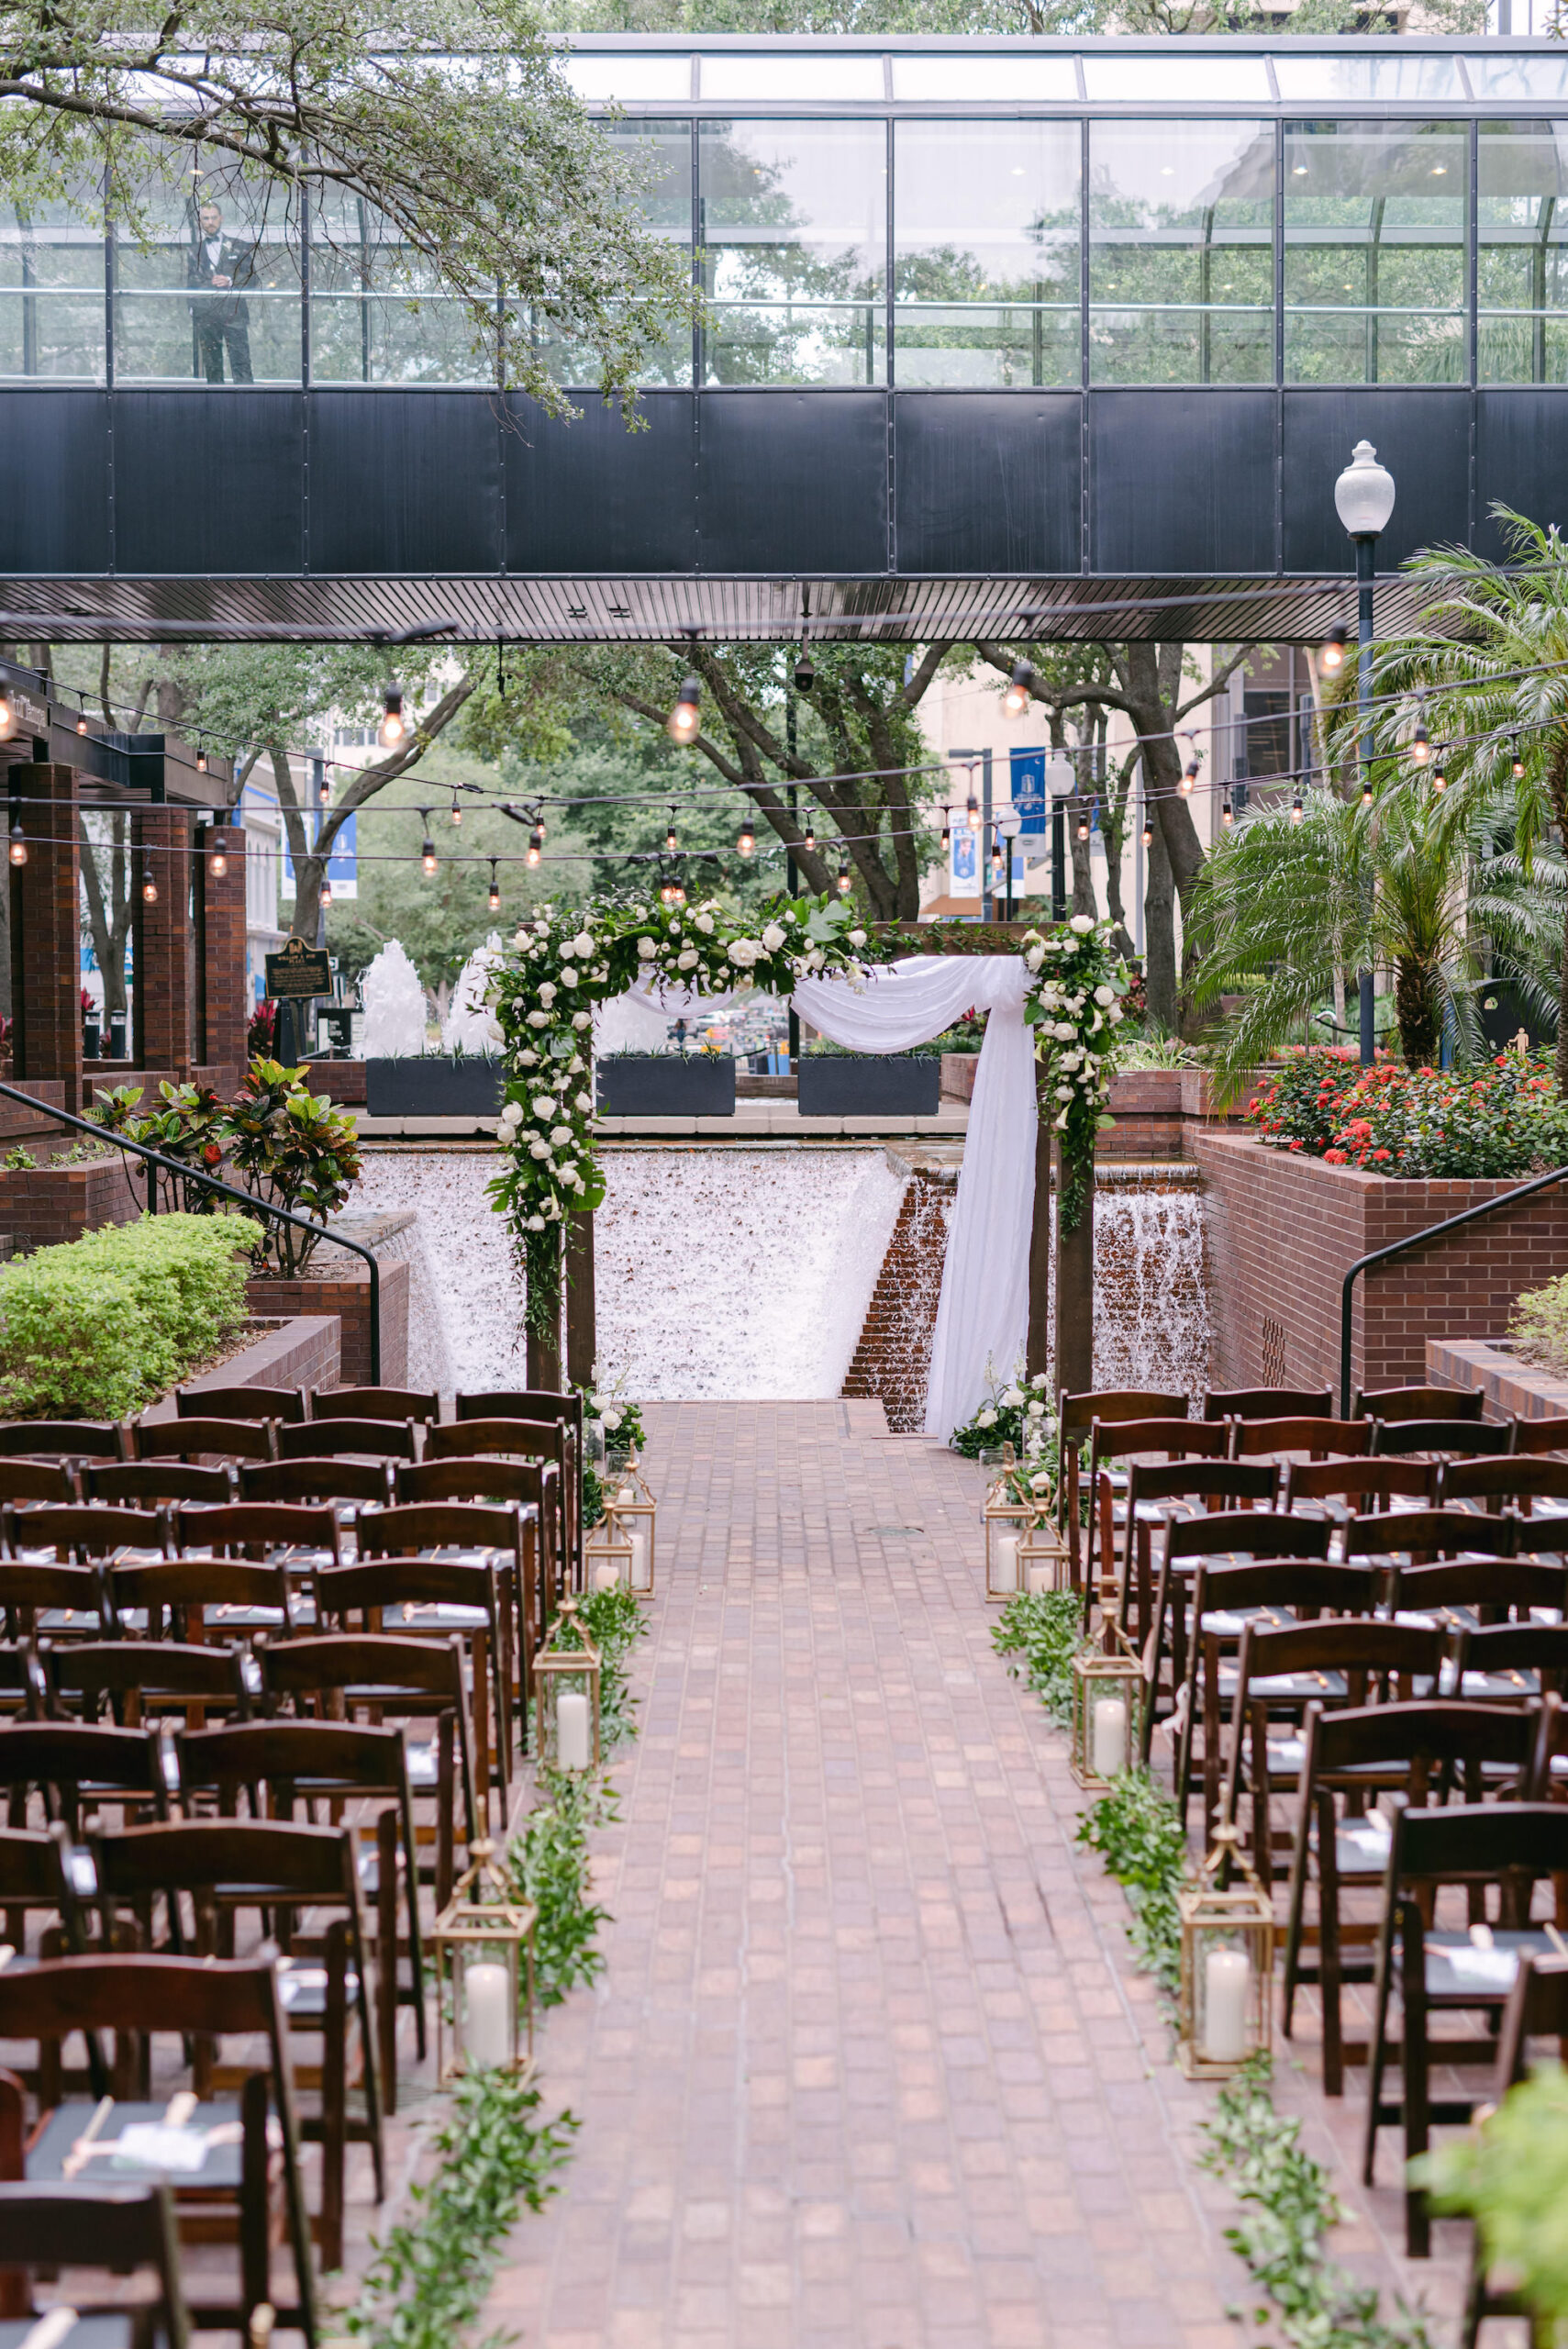 White Rose and Greenery Jewish Chuppah Wedding Ceremony Arch Inspiration | Tampa Wedding Florist FH Events | Outdoor Courtyard Ceremony with Waterfall Fountain Backdrop | Venue Hilton Tampa Downtown